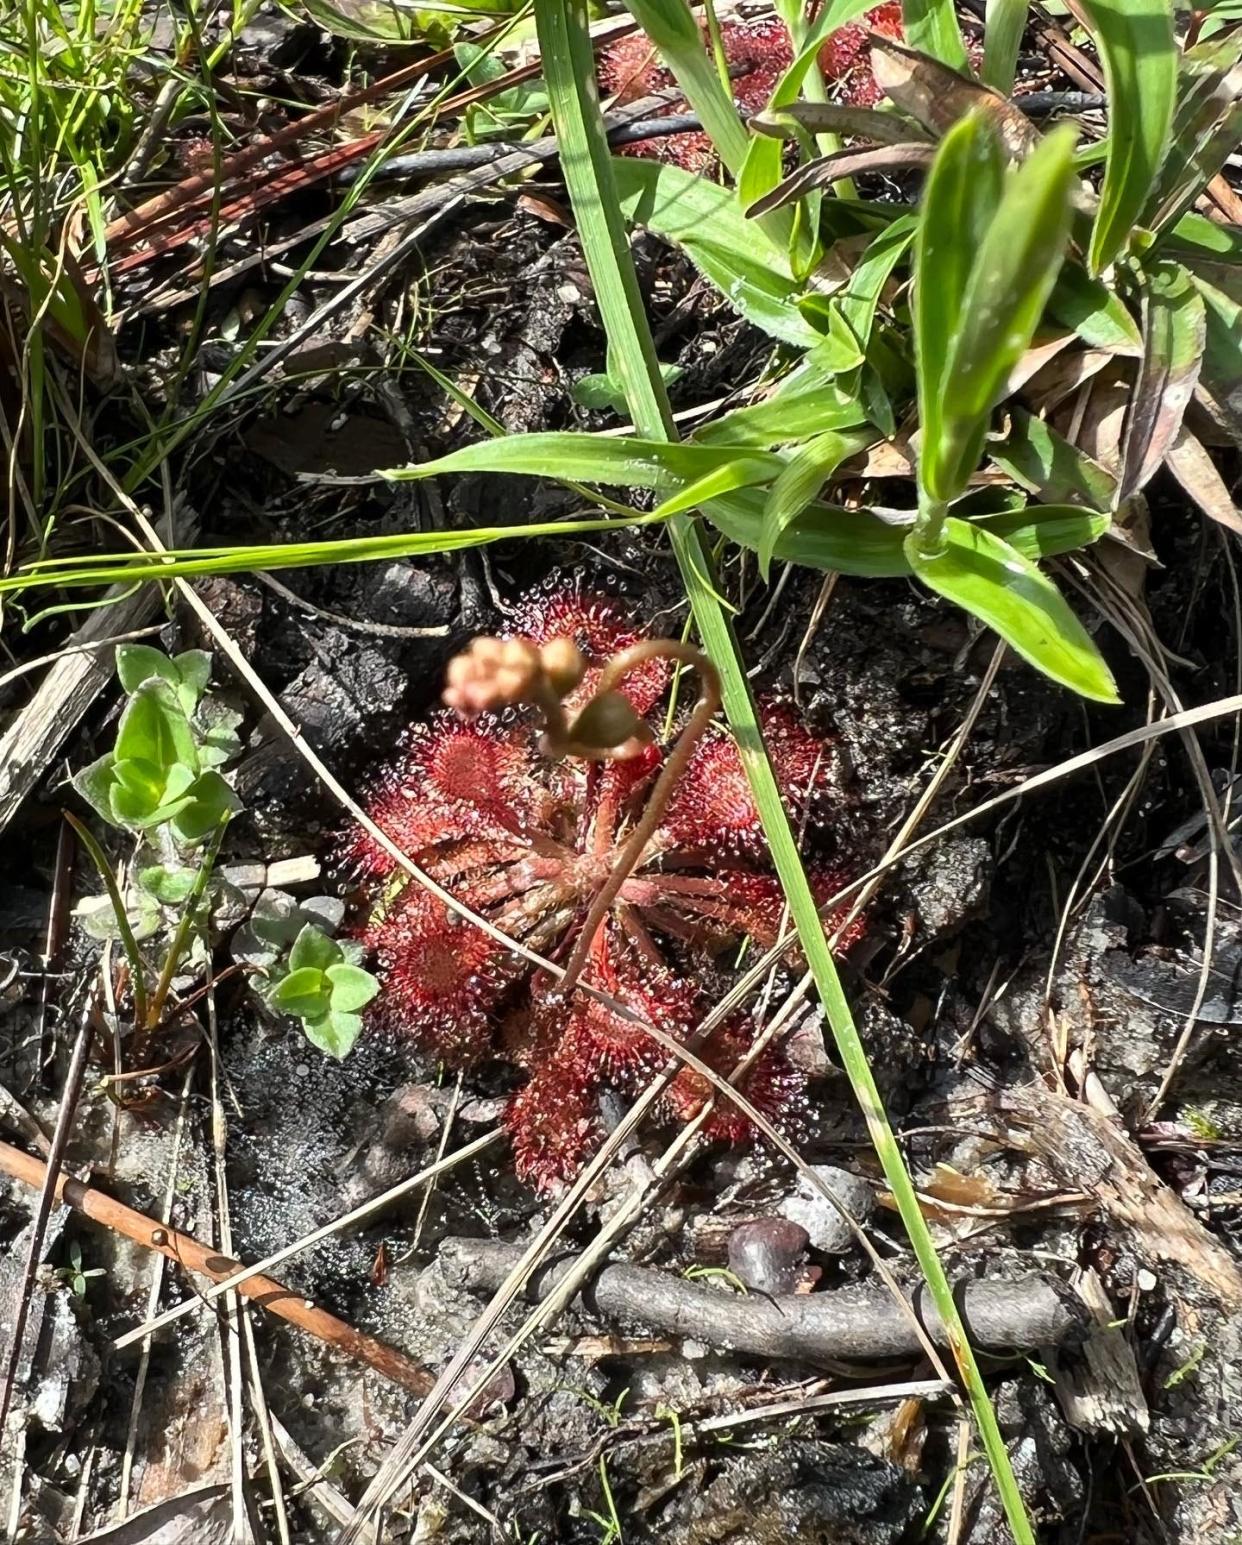 Many of the varieties of sundew (Drosera spp.) have a flat growth pattern and can be found flush to the ground. Look down while you walk, and you may see some.